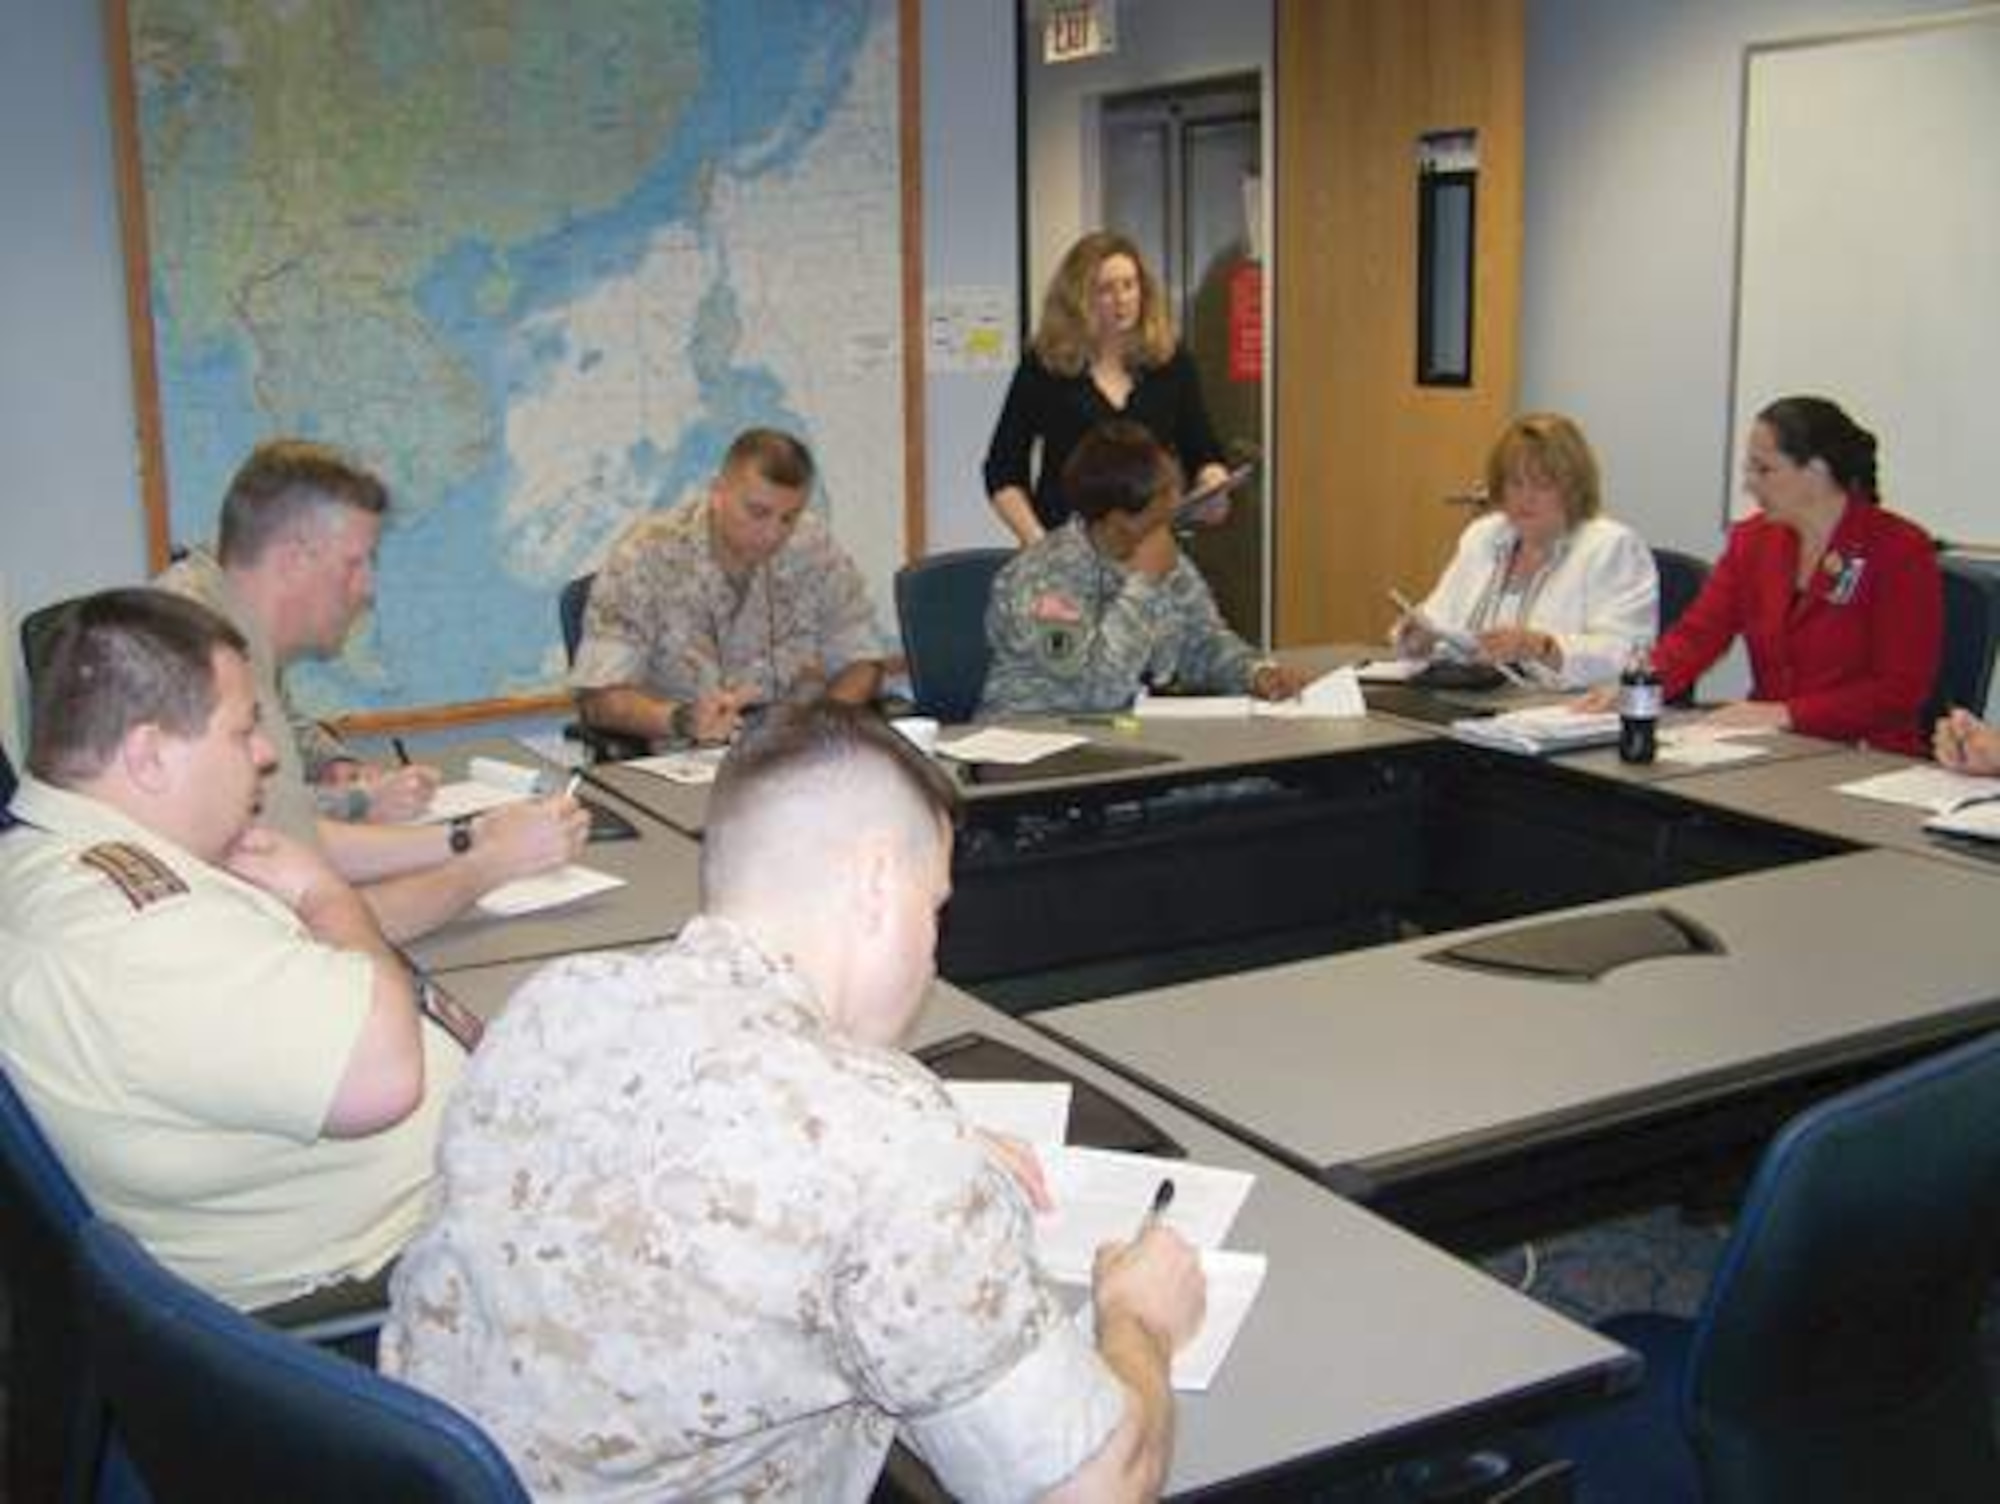 Students from multiple senior service schools conduct planning during execution of the 2011 Joint Land, Air and Sea Strategic Exercise. More than 120 students from these schools arrive Sunday to begin the 2012 event. (Air Force photo by Tech. Sgt. Juan Torres)